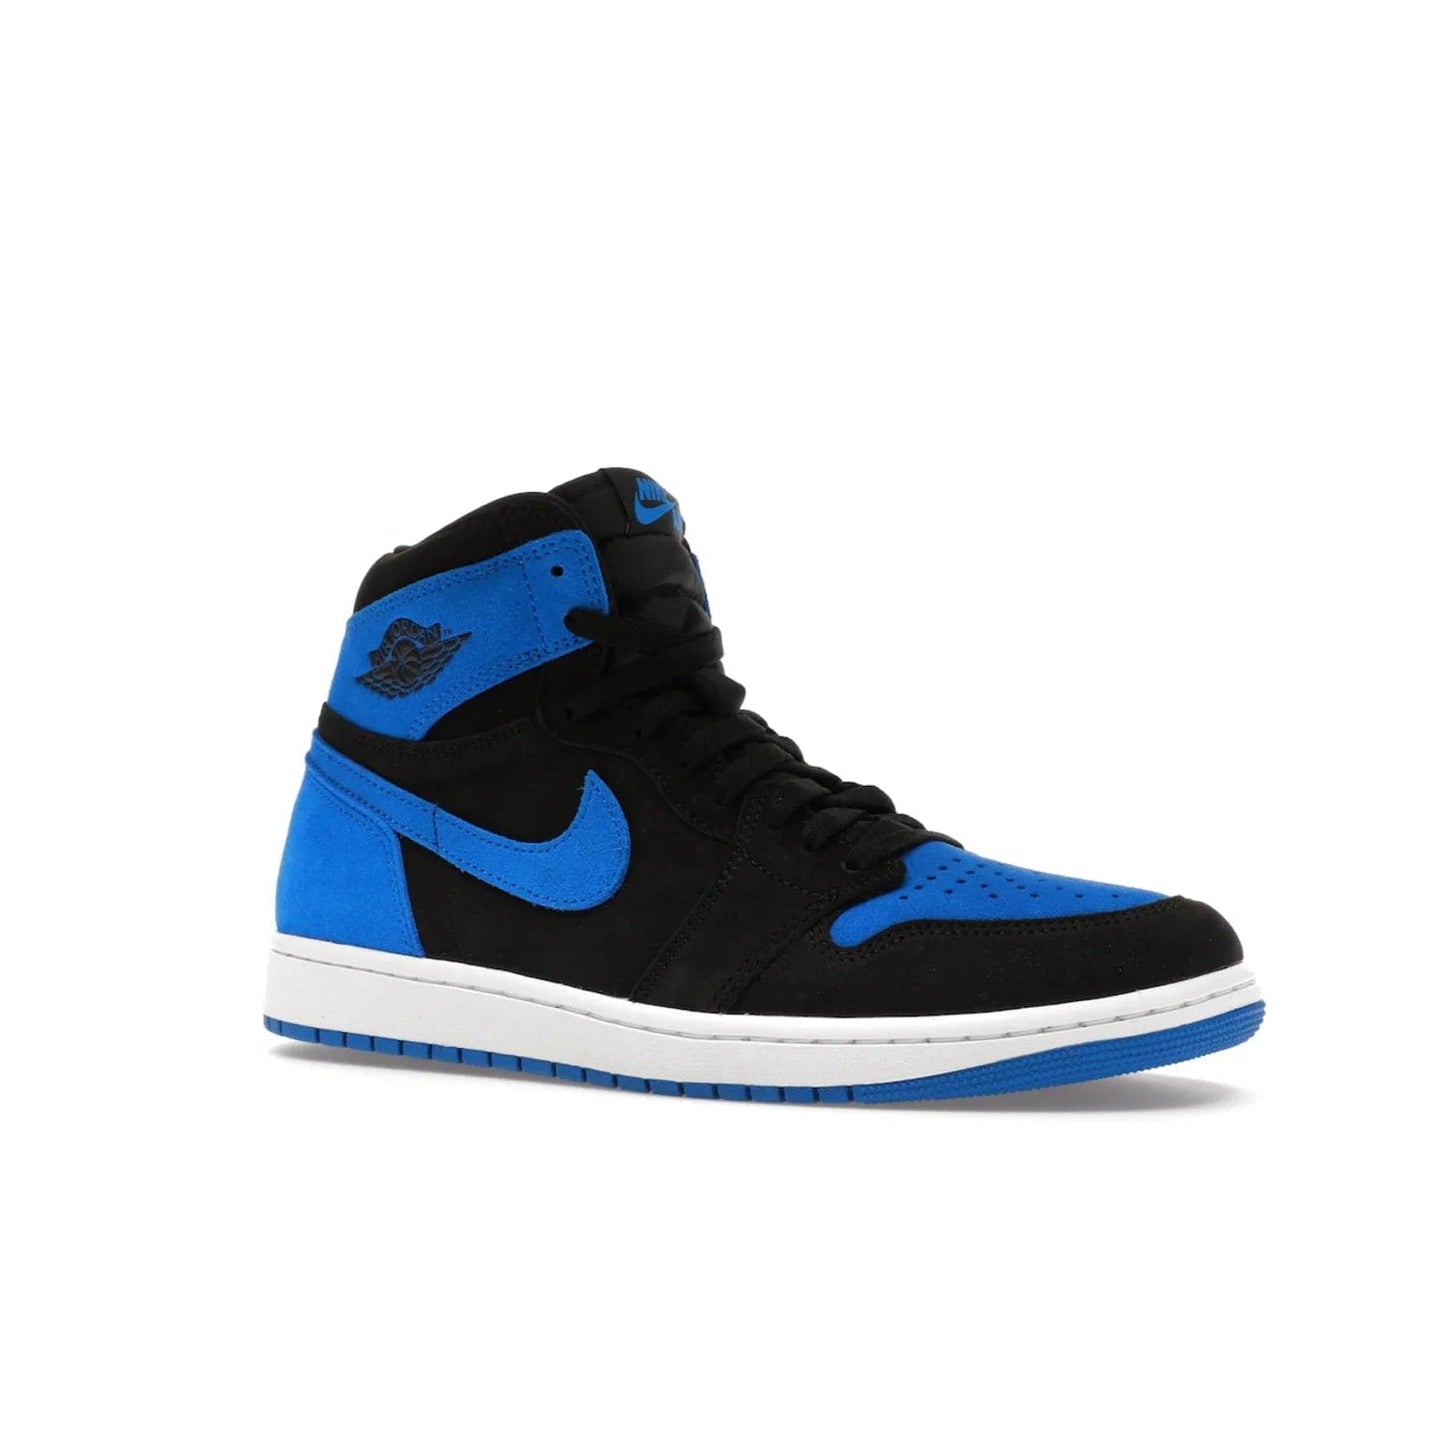 Jordan 1 Retro High OG Royal Reimagined - Image 4 - Only at www.BallersClubKickz.com - ####
Old meets the new: Jordan 1 Retro High OG 'Royal Reimagined' is a bold statement of evolution with its royal blue and black suede material makeup. Swoosh overlays, Wings logos, padded ankle collars and Nike Air tags maintain the OG's legendary lineage. Get a pair on November 4th and be part of a fearless, unyielding story.